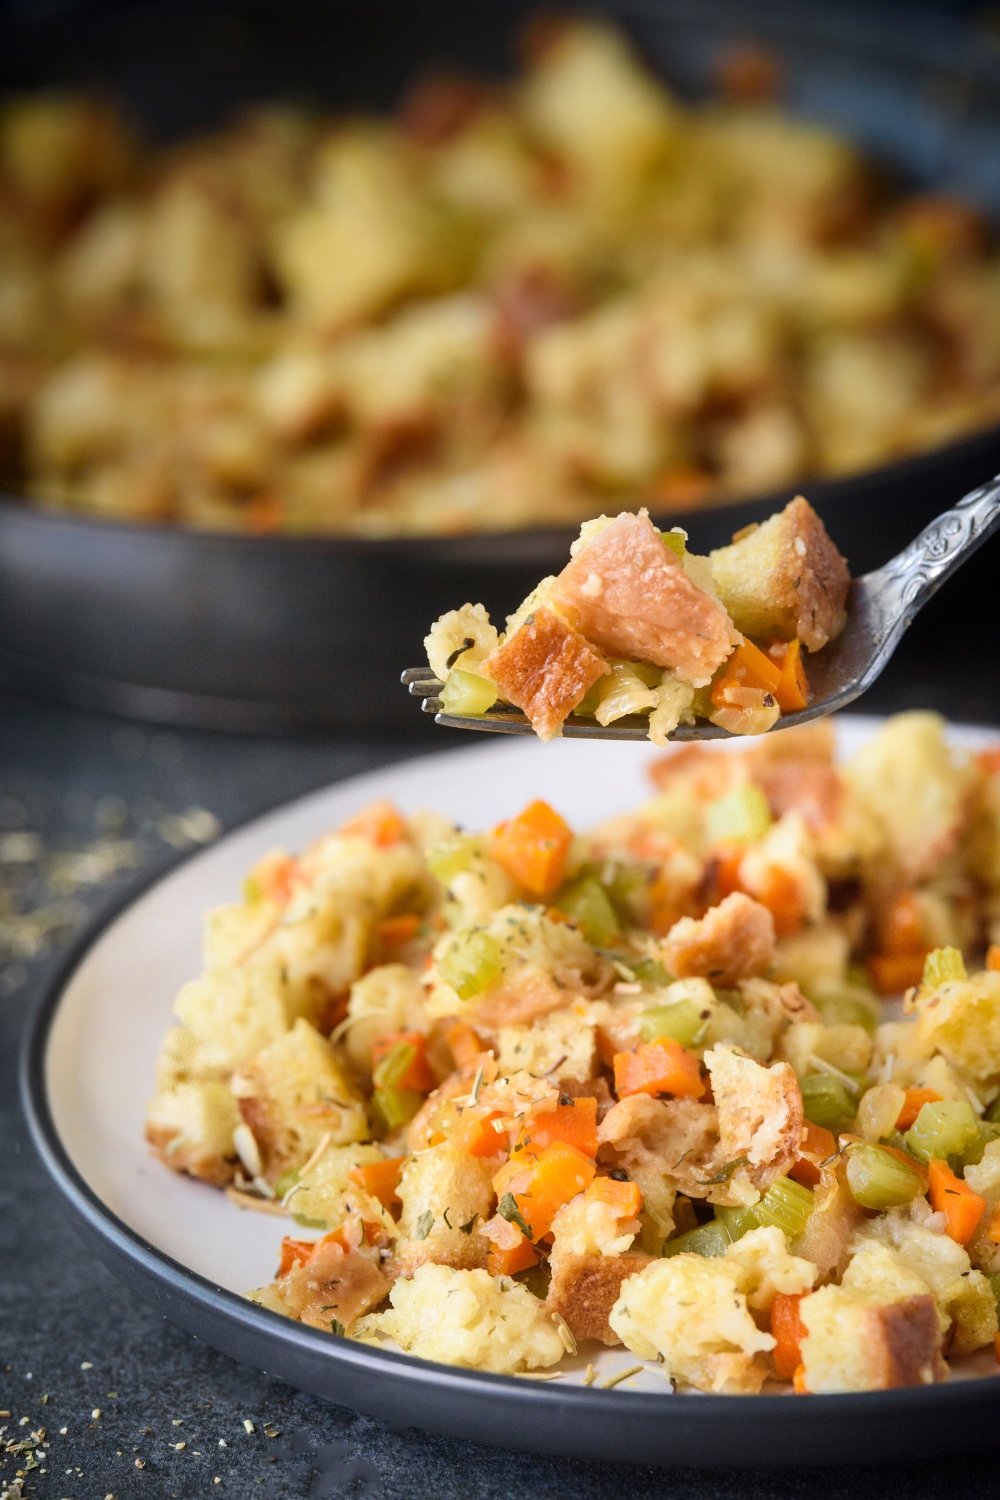 A fork holding a bite of stovetop stuffing above a plate filled with stuffing.